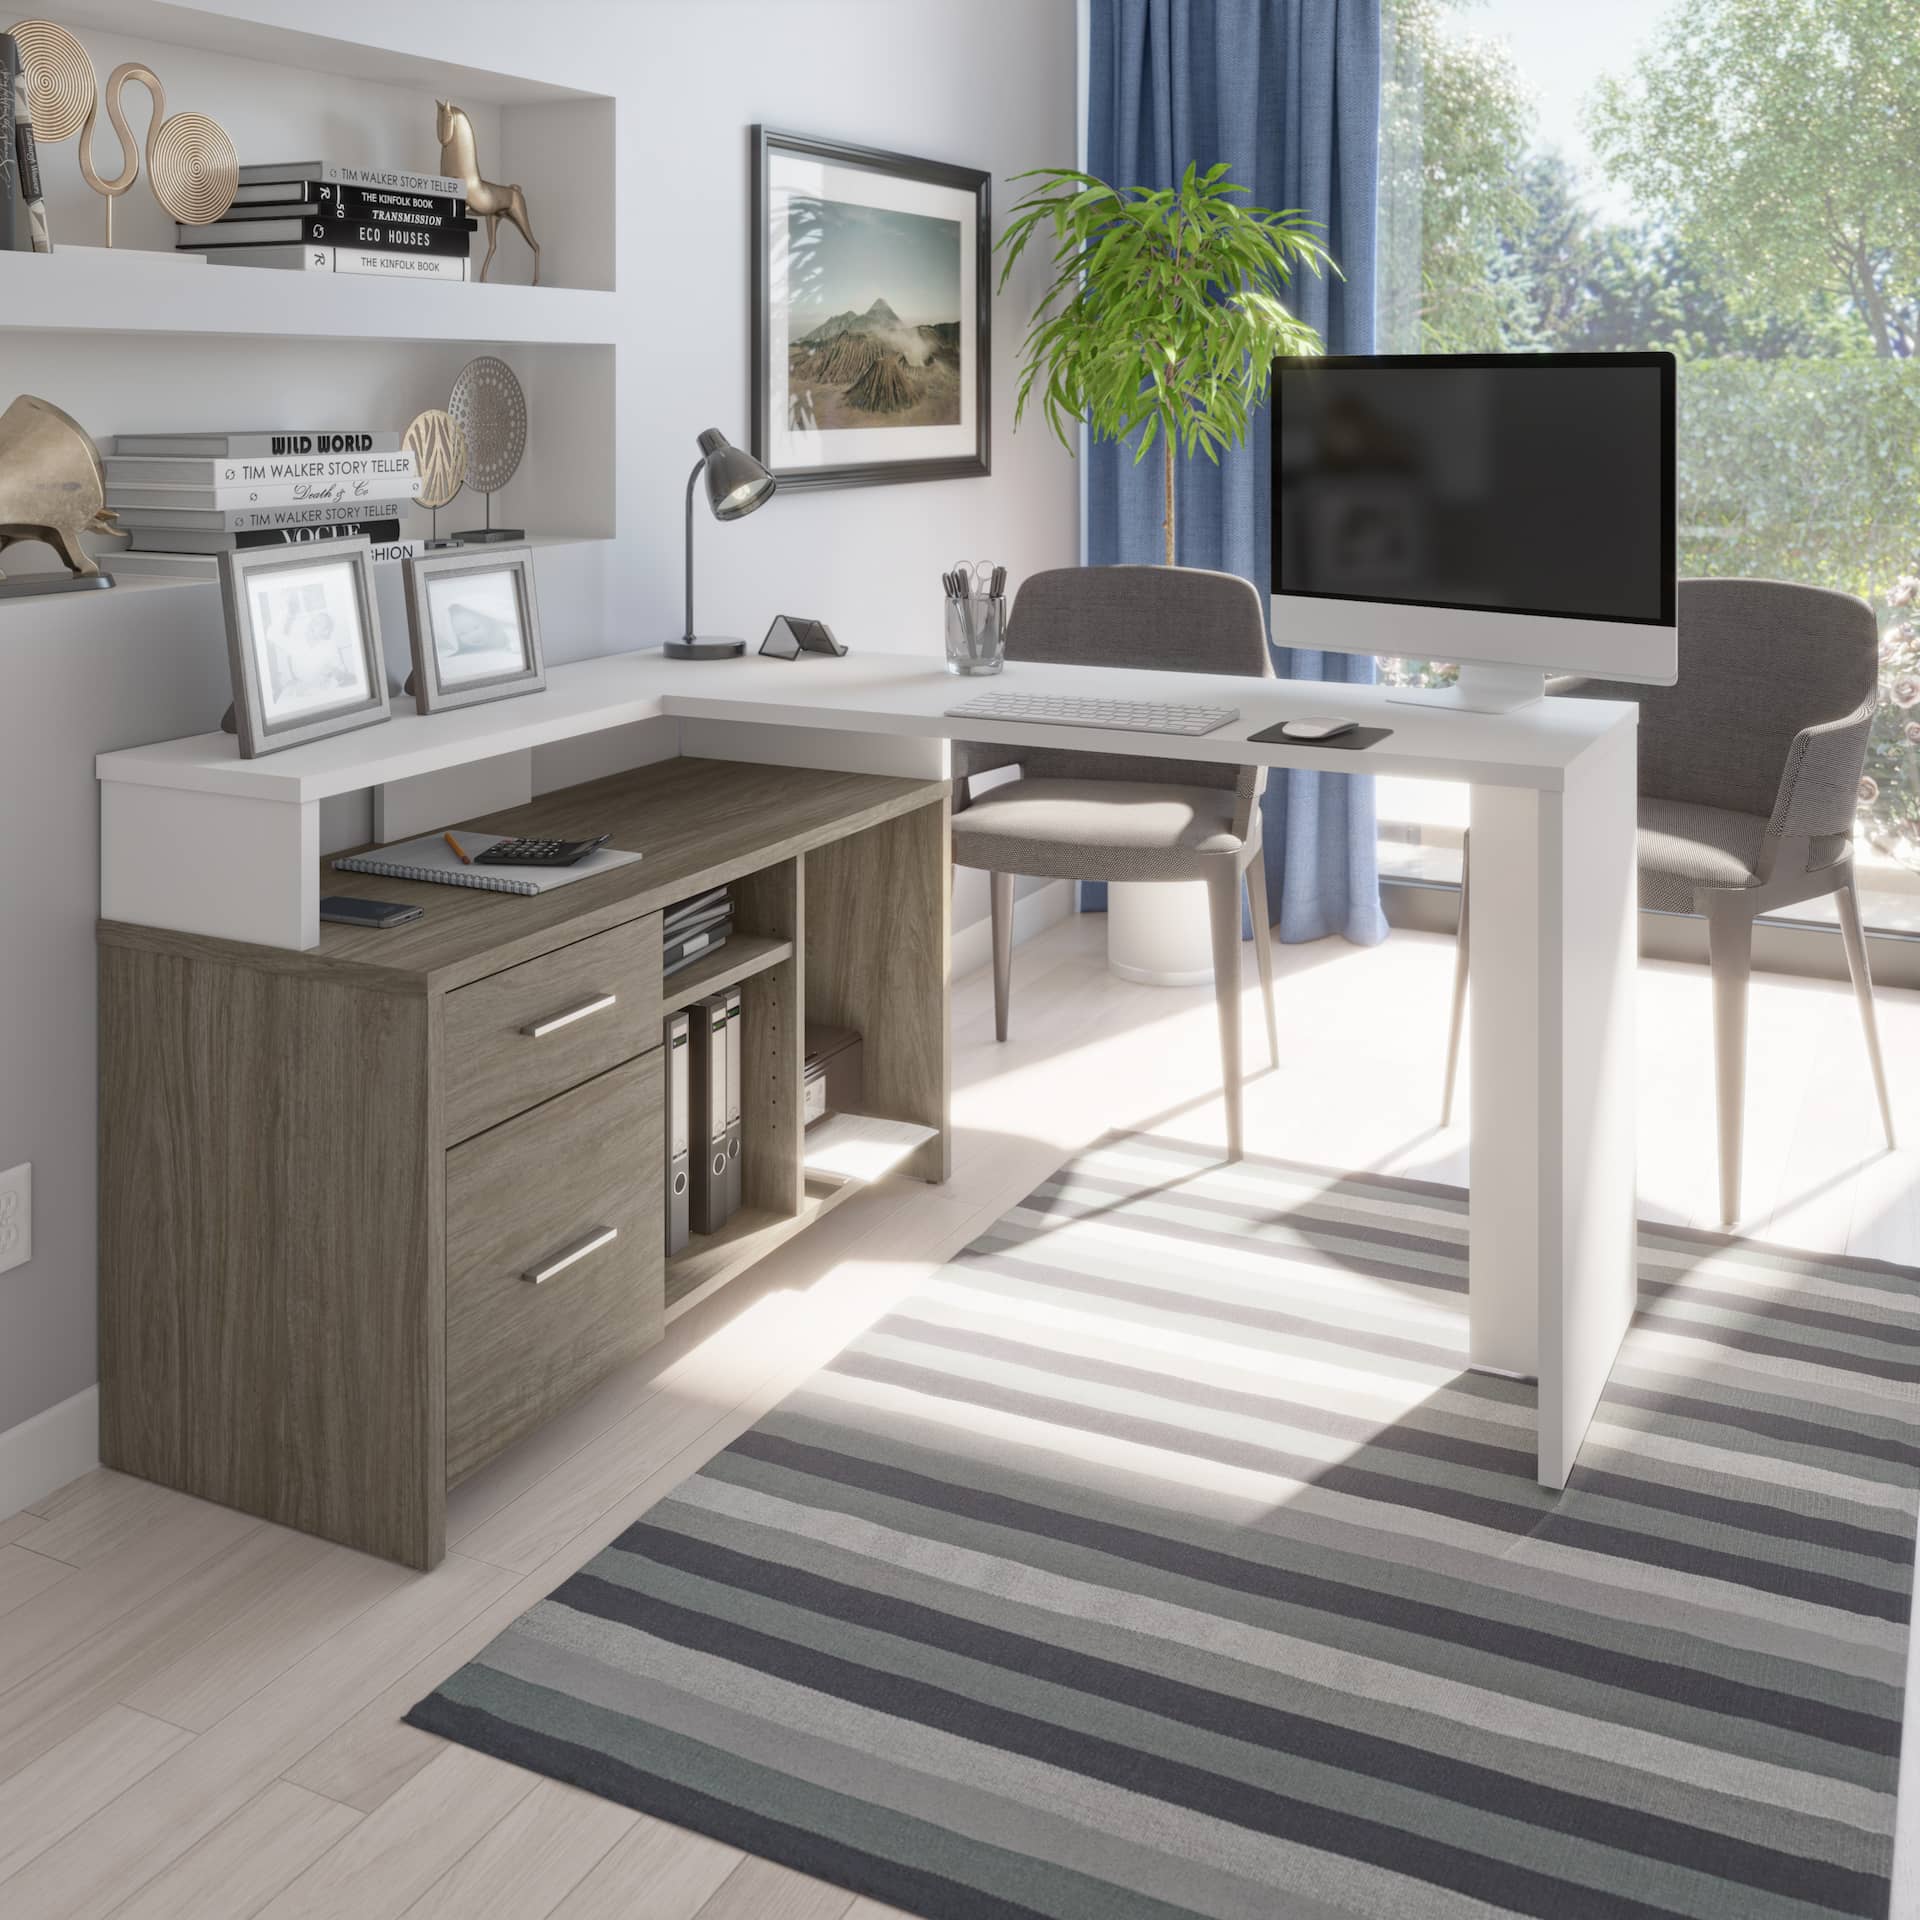 4 Ways to Create a Productive Workspace with Budget-Friendly Office Furniture